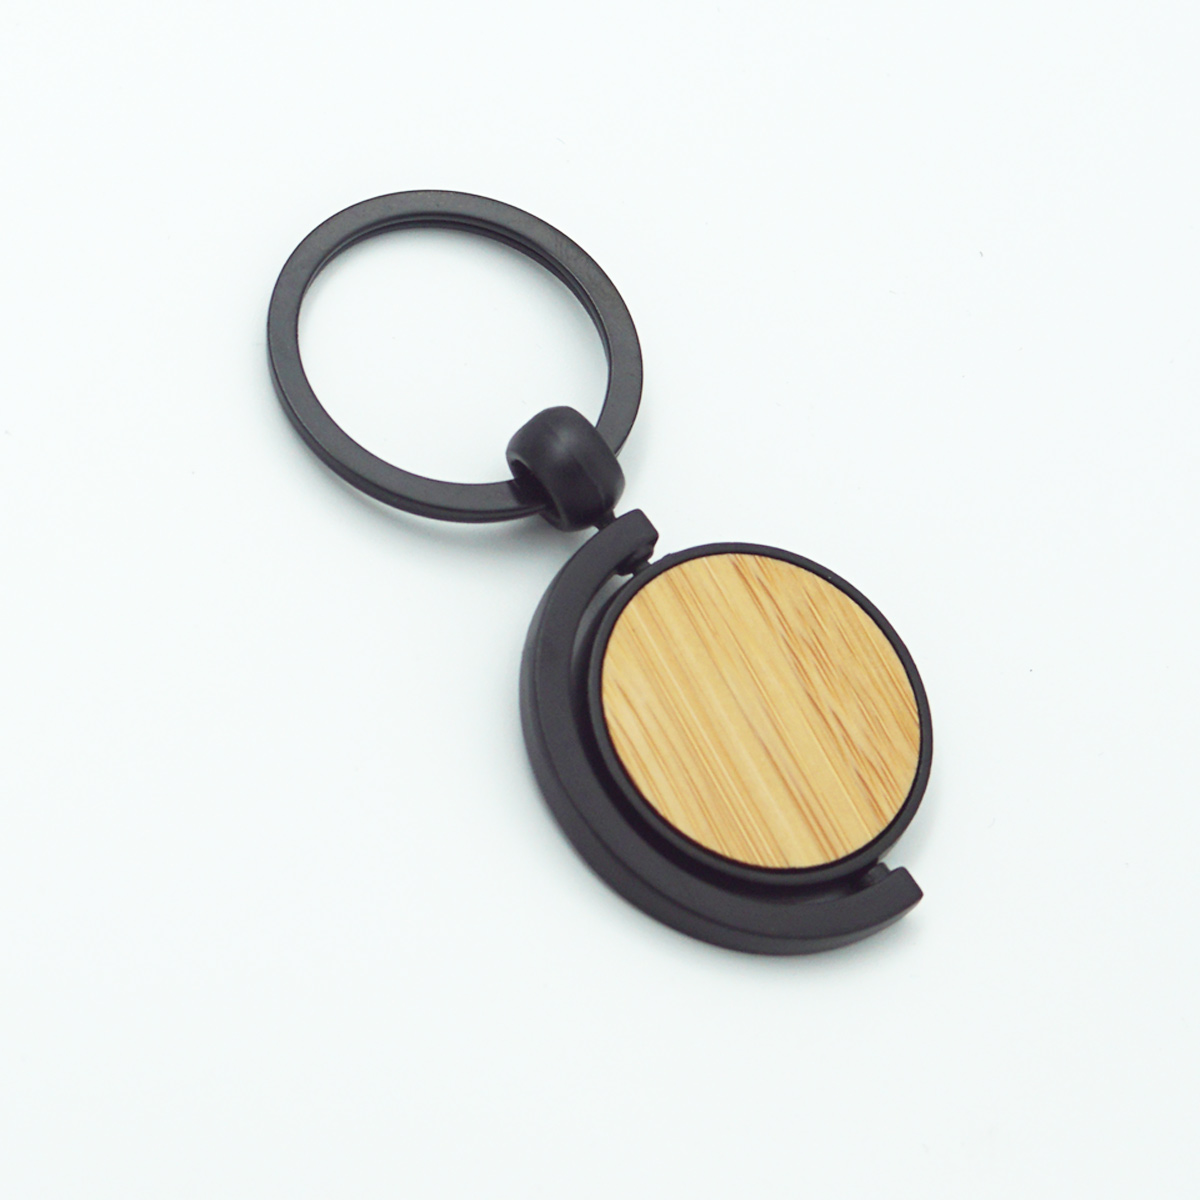 penhouse.in 7017 Wooden With Black Metal Ring Designed Rotating Personalized Keychain SKU KP151